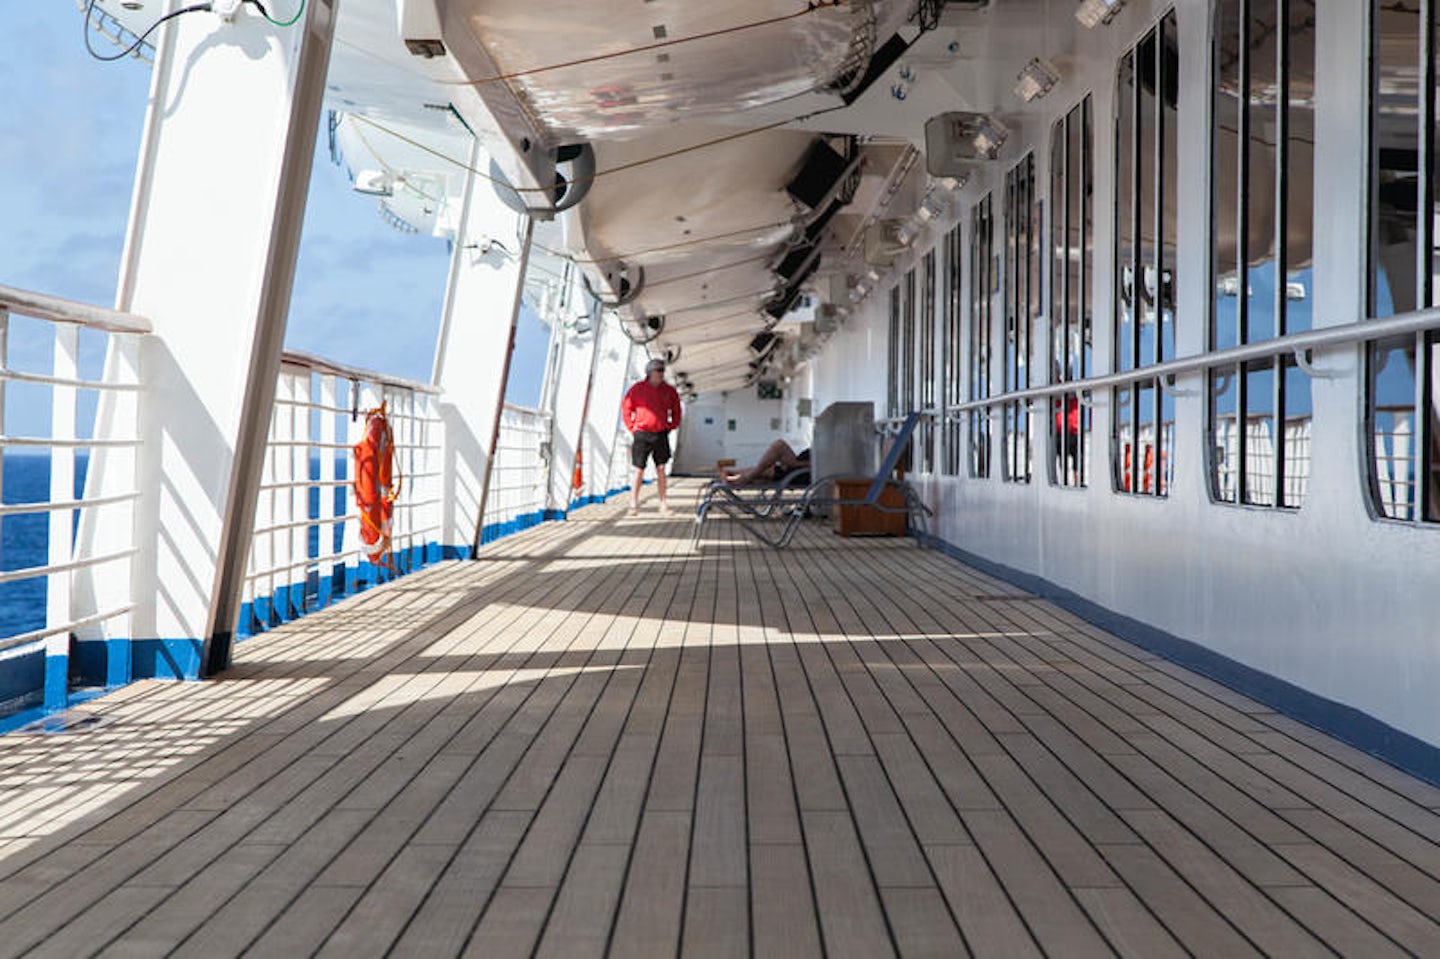 Exterior Deck on Carnival Conquest